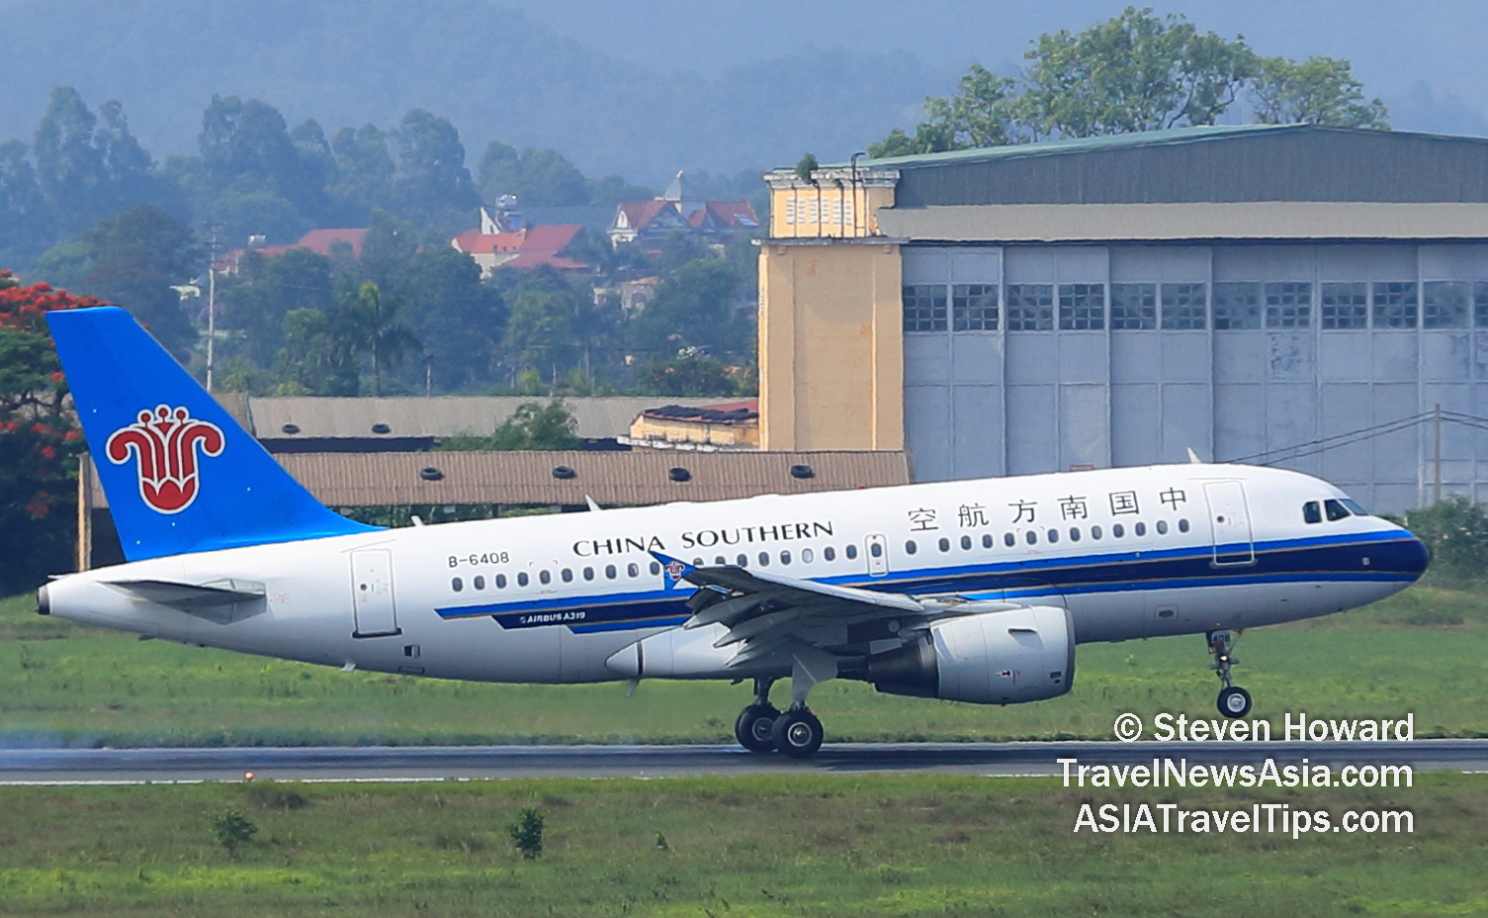 China Southern A319 reg: B-6408. Picture by Steven Howard of TravelNewsAsia.com Click to enlarge.